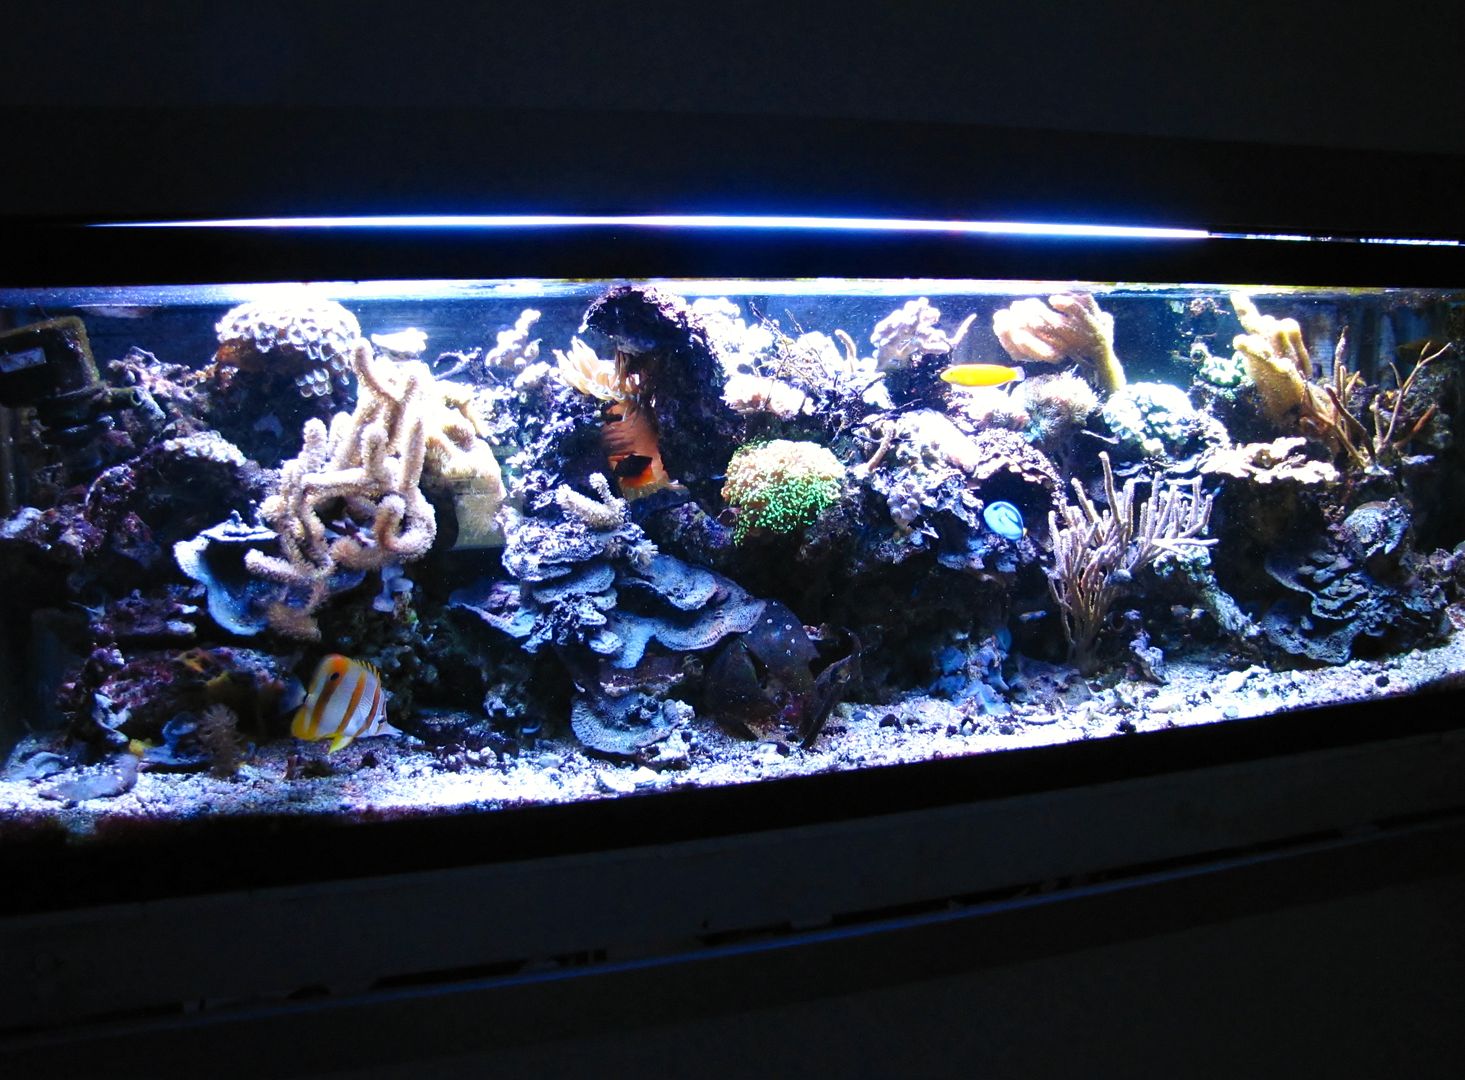 55 gallons freshwater fish tank (mostly fish and non-living decorations) -  Mangrove Forest